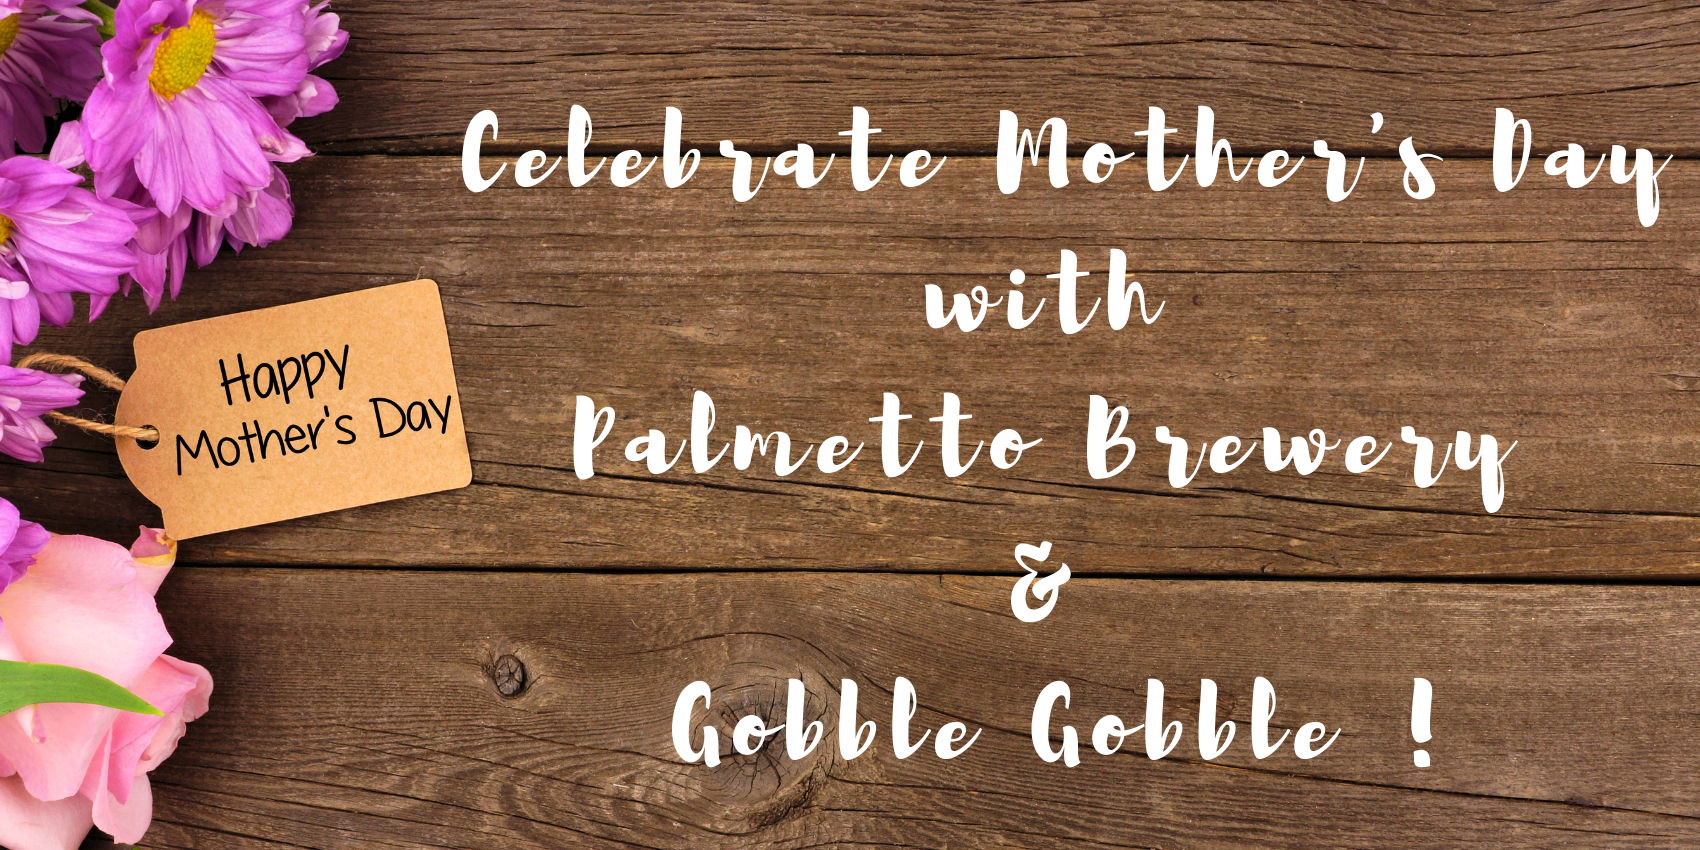 Mother's Day at Palmetto Brewery promotional image